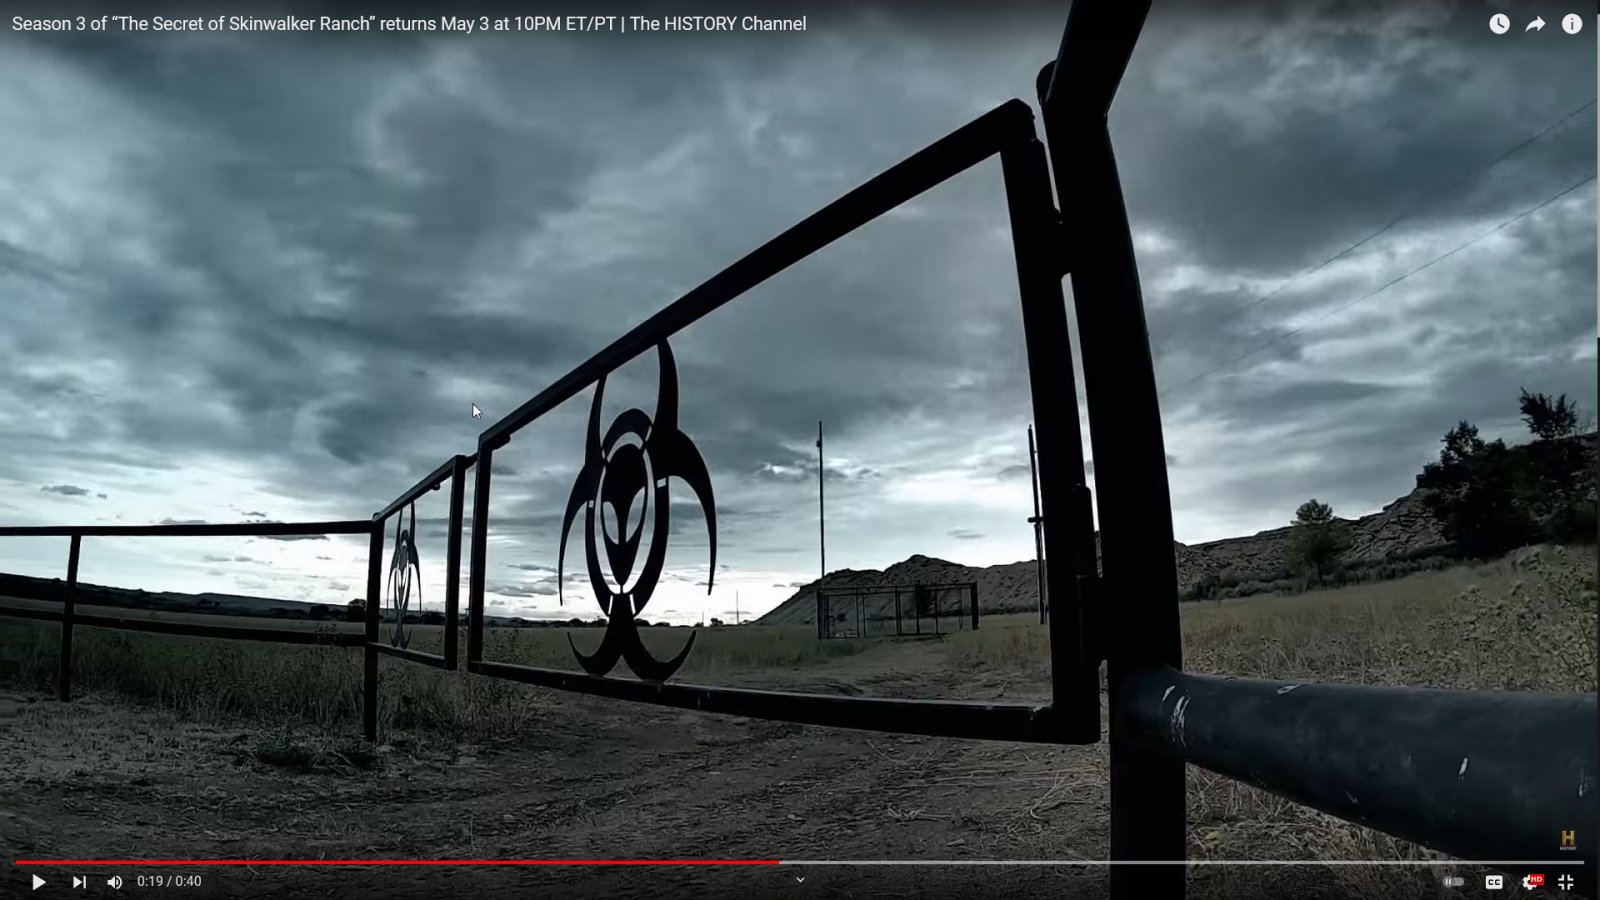 Teaser Screencap showing the powerlines viewed through a gate with the Skinwalker ranch logo, with the mesa in the background.